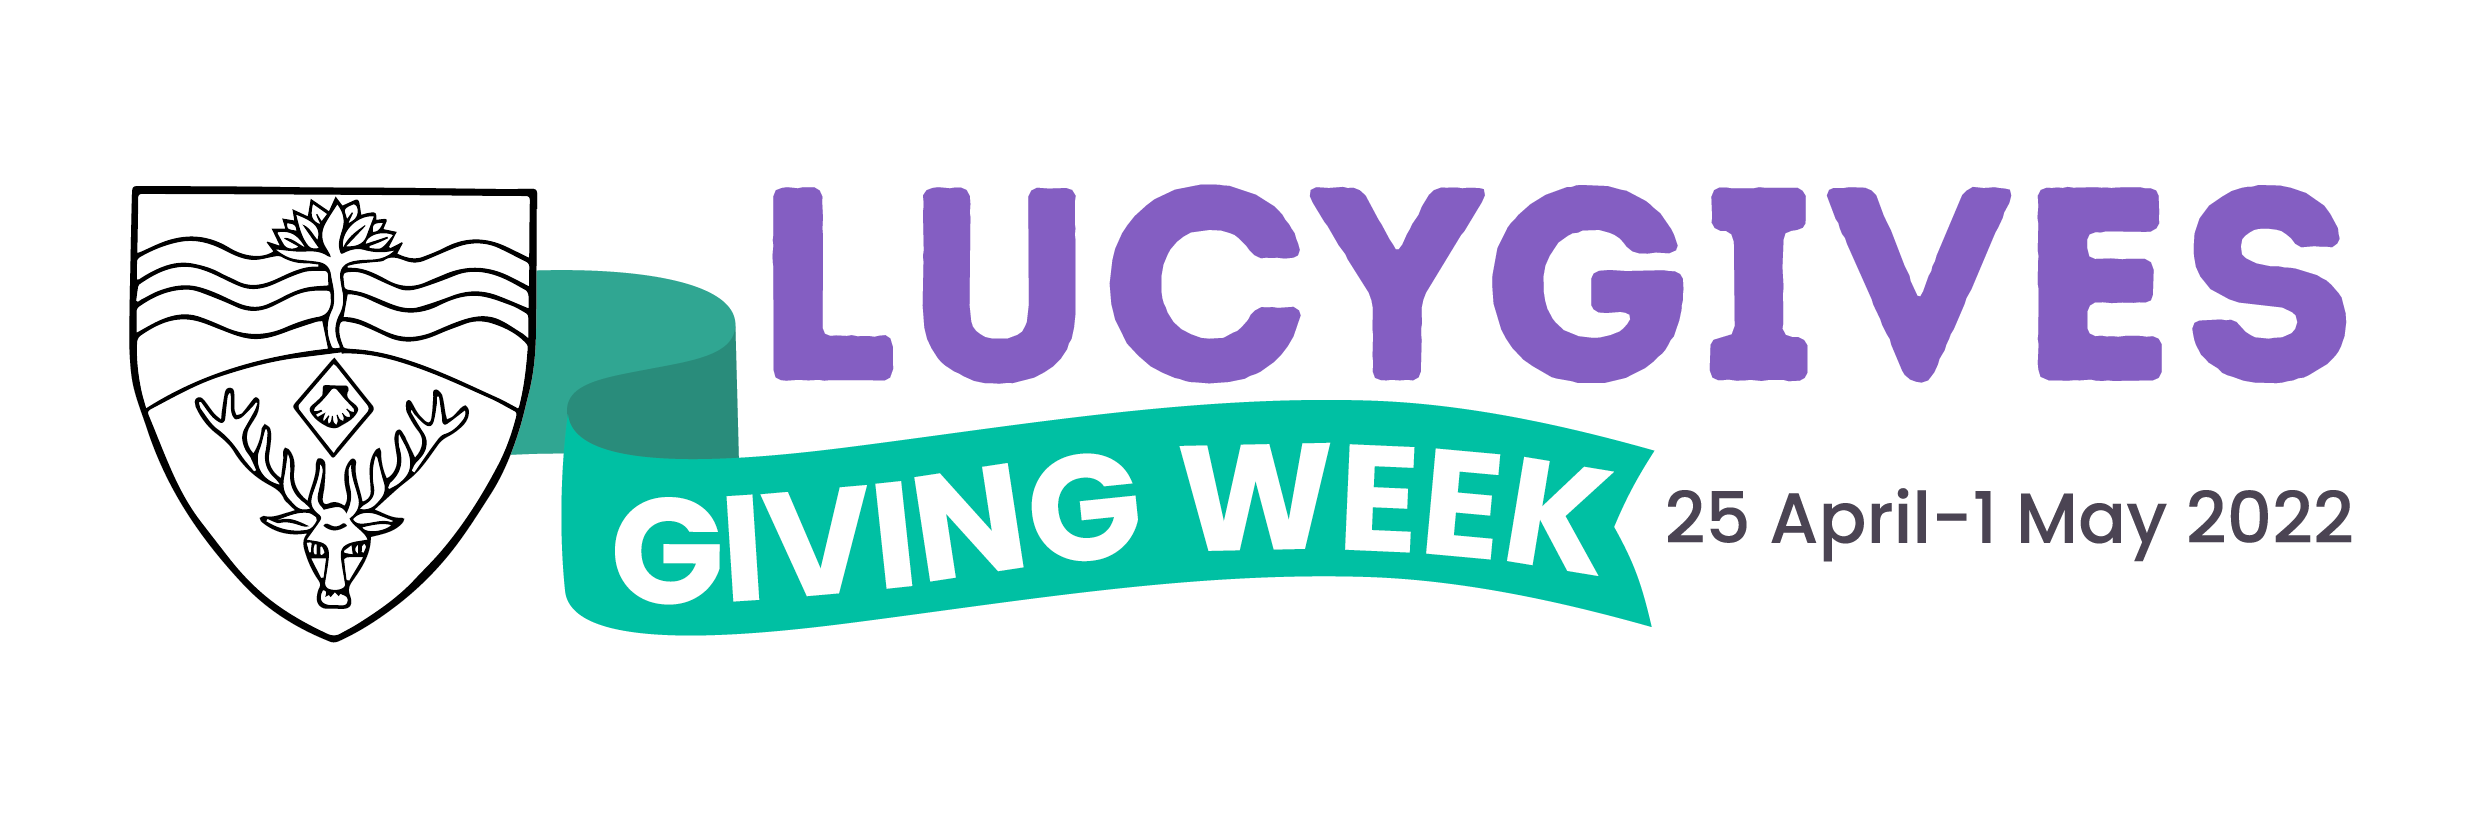 LucyGives Giving Week 2022